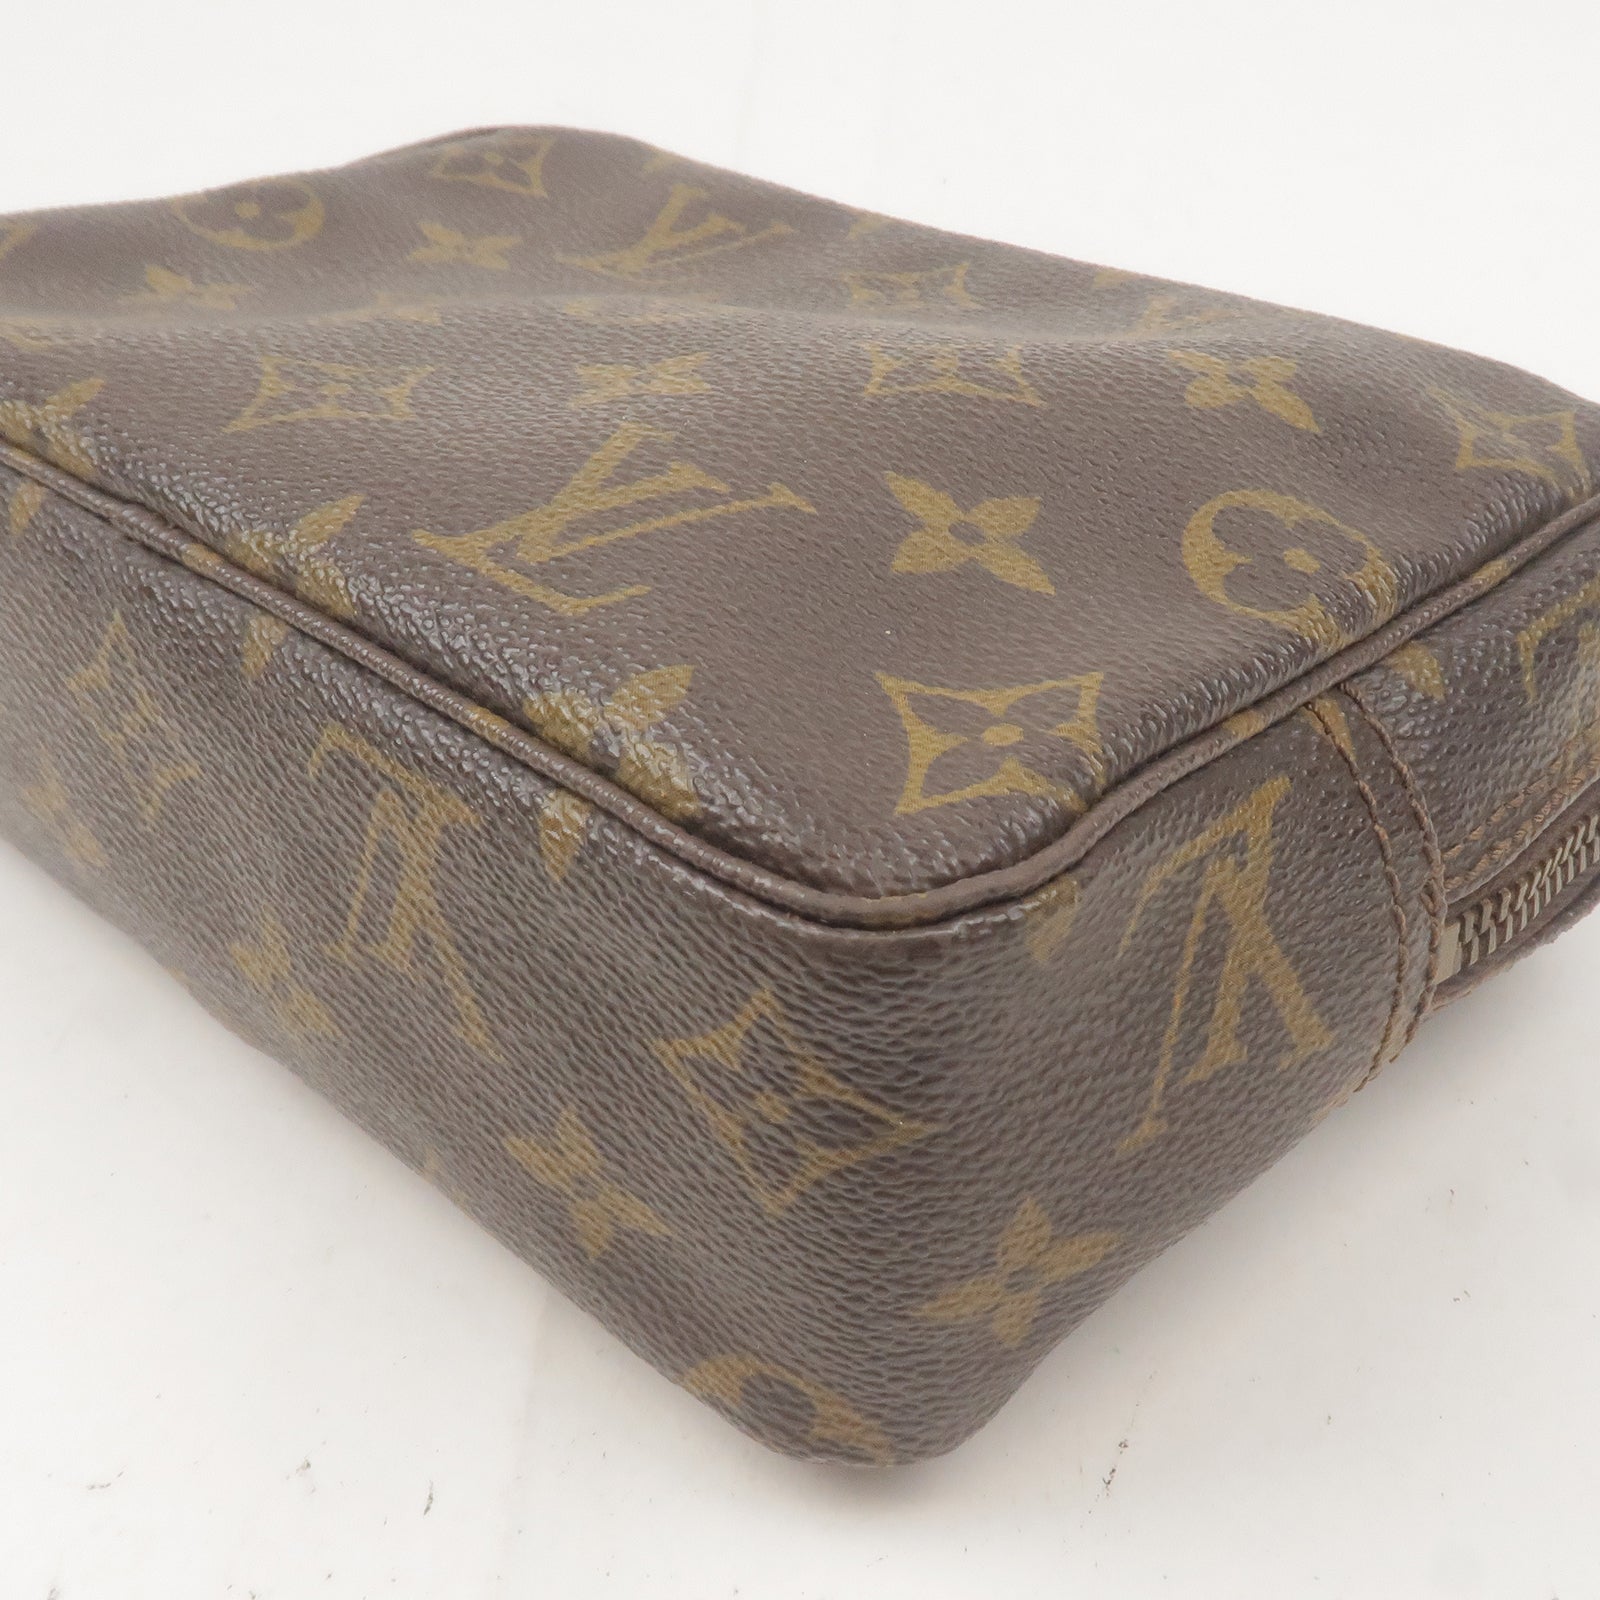 Louis Vuitton Neverfull NM Tote Leather and Monogram Teddy